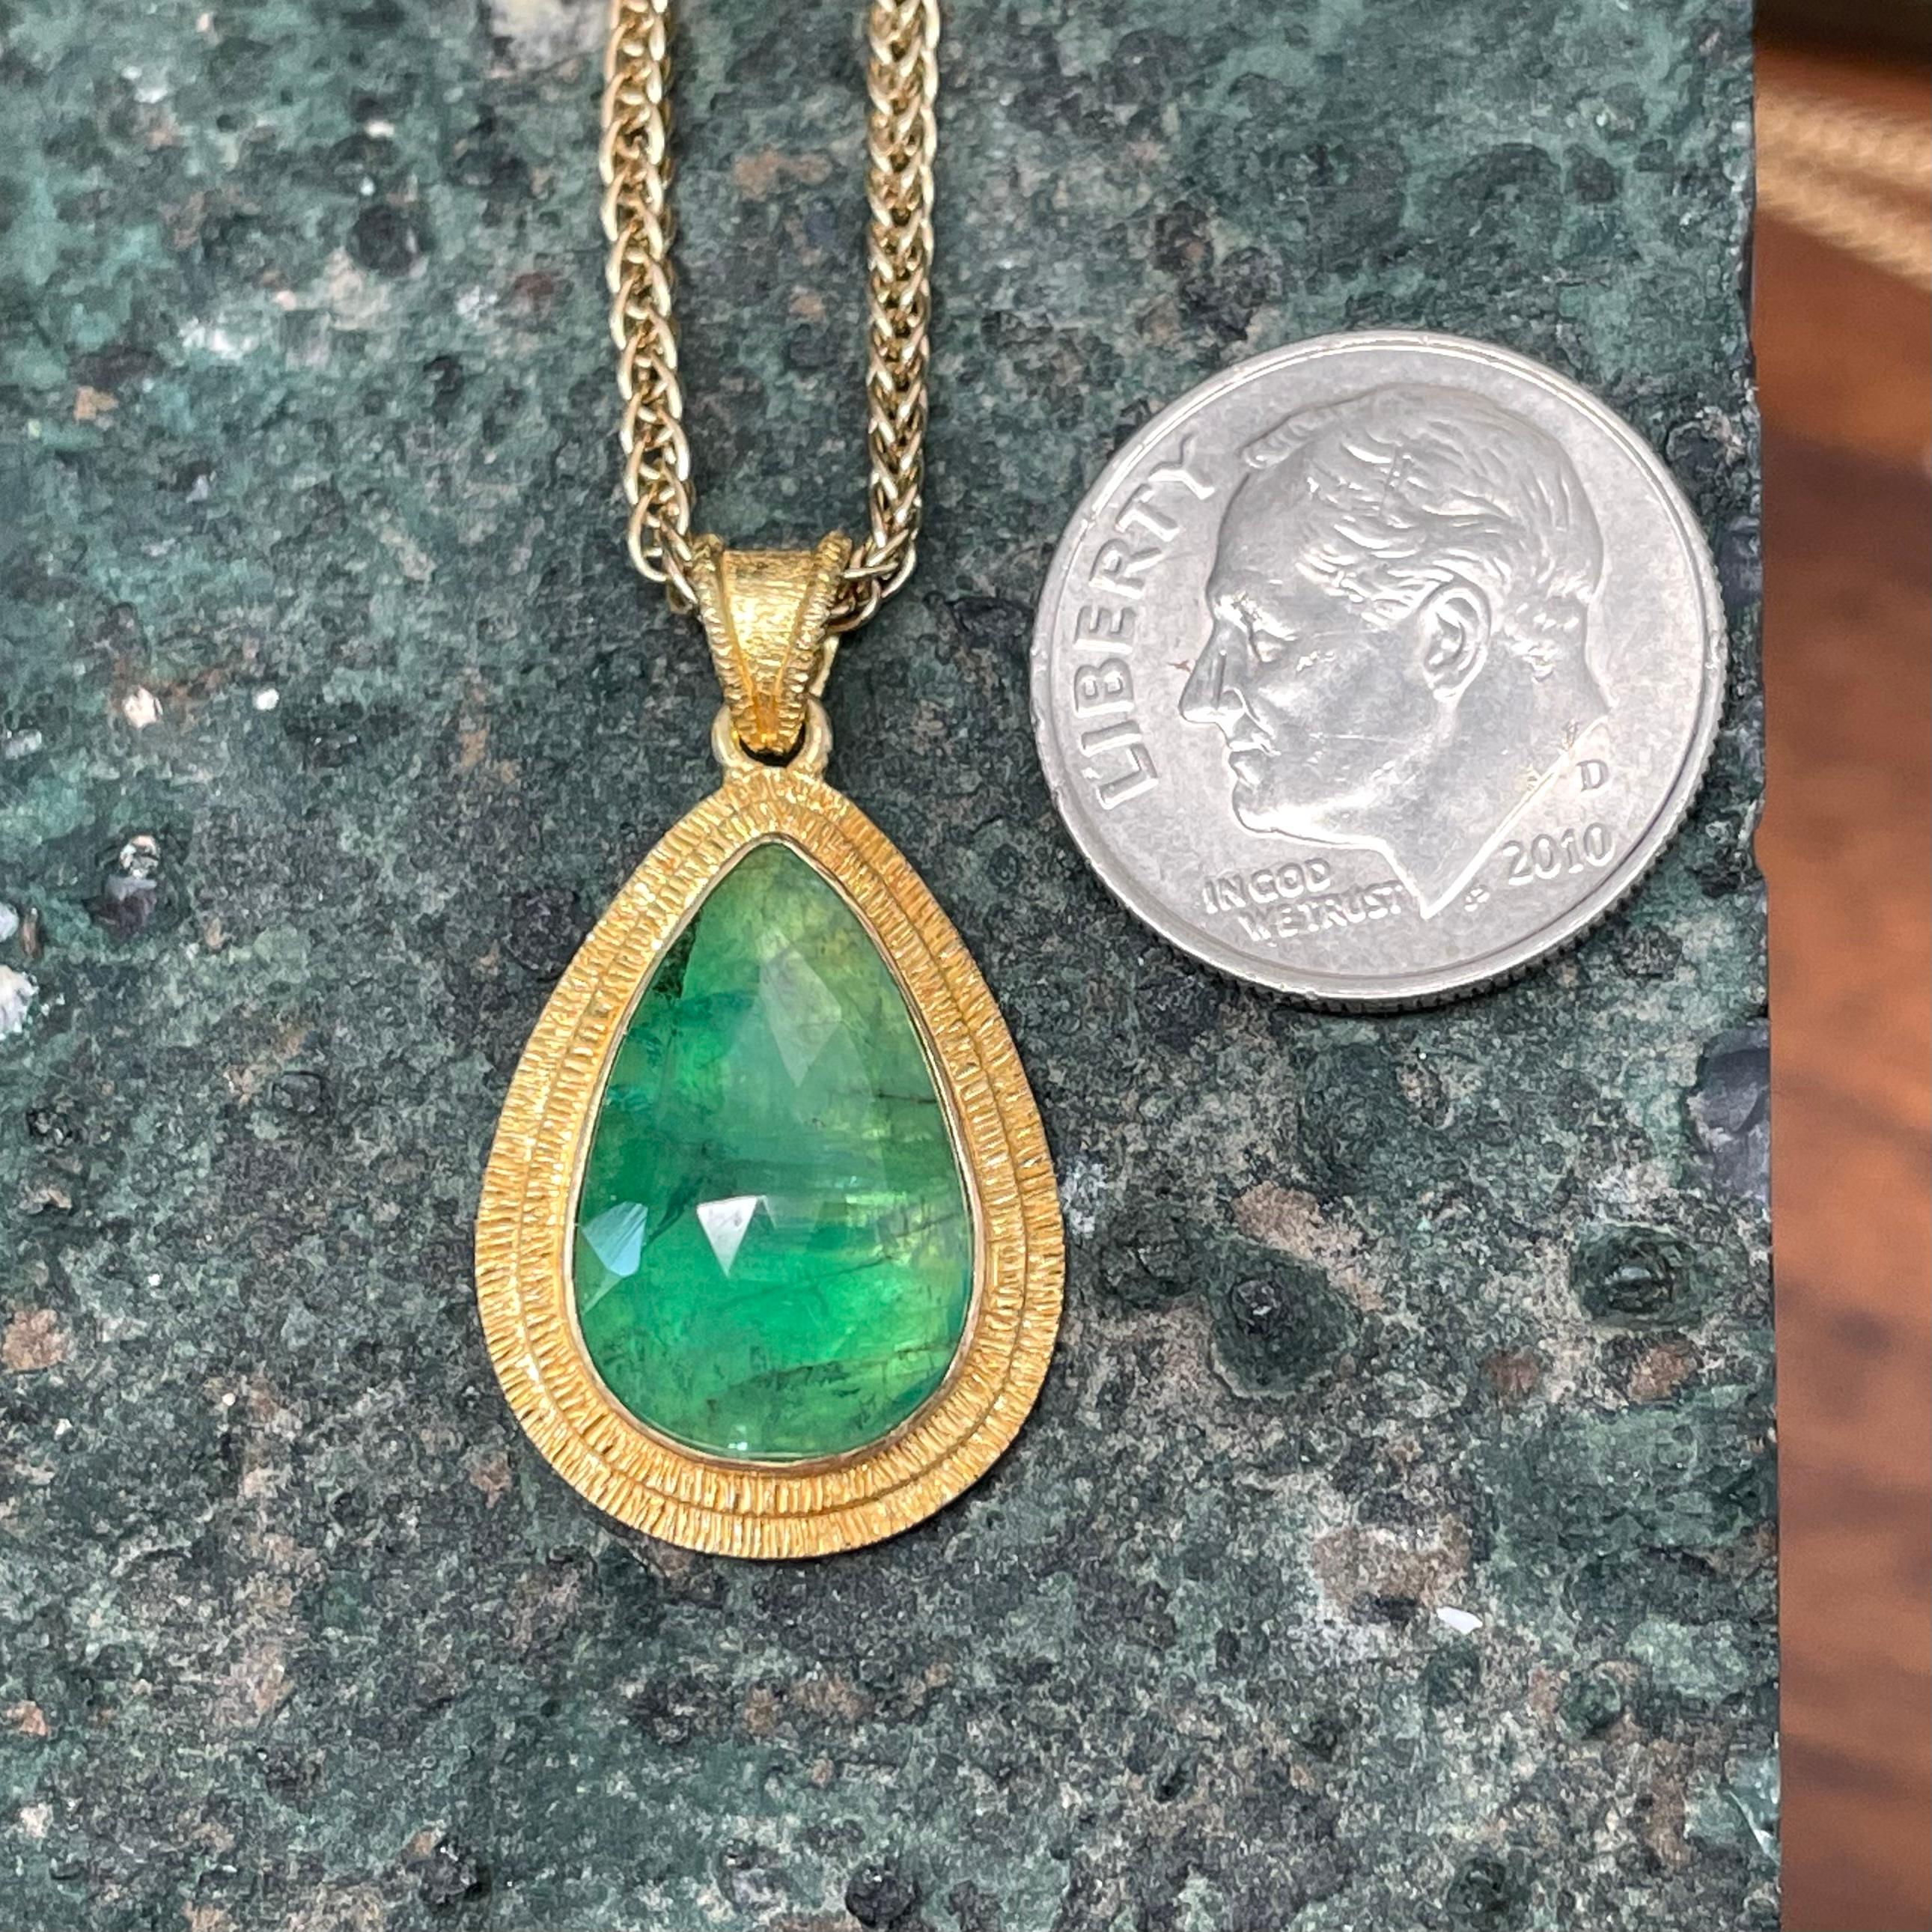 A sweet 10 x 16 mm pear shaped rose cut Zambian emerald is highlighted in an organic doubled line textured bezel with similar bail in this enchanting pendant.  A really nice splash of beautiful green. The 20 inch triple woven 18K chain shown is not